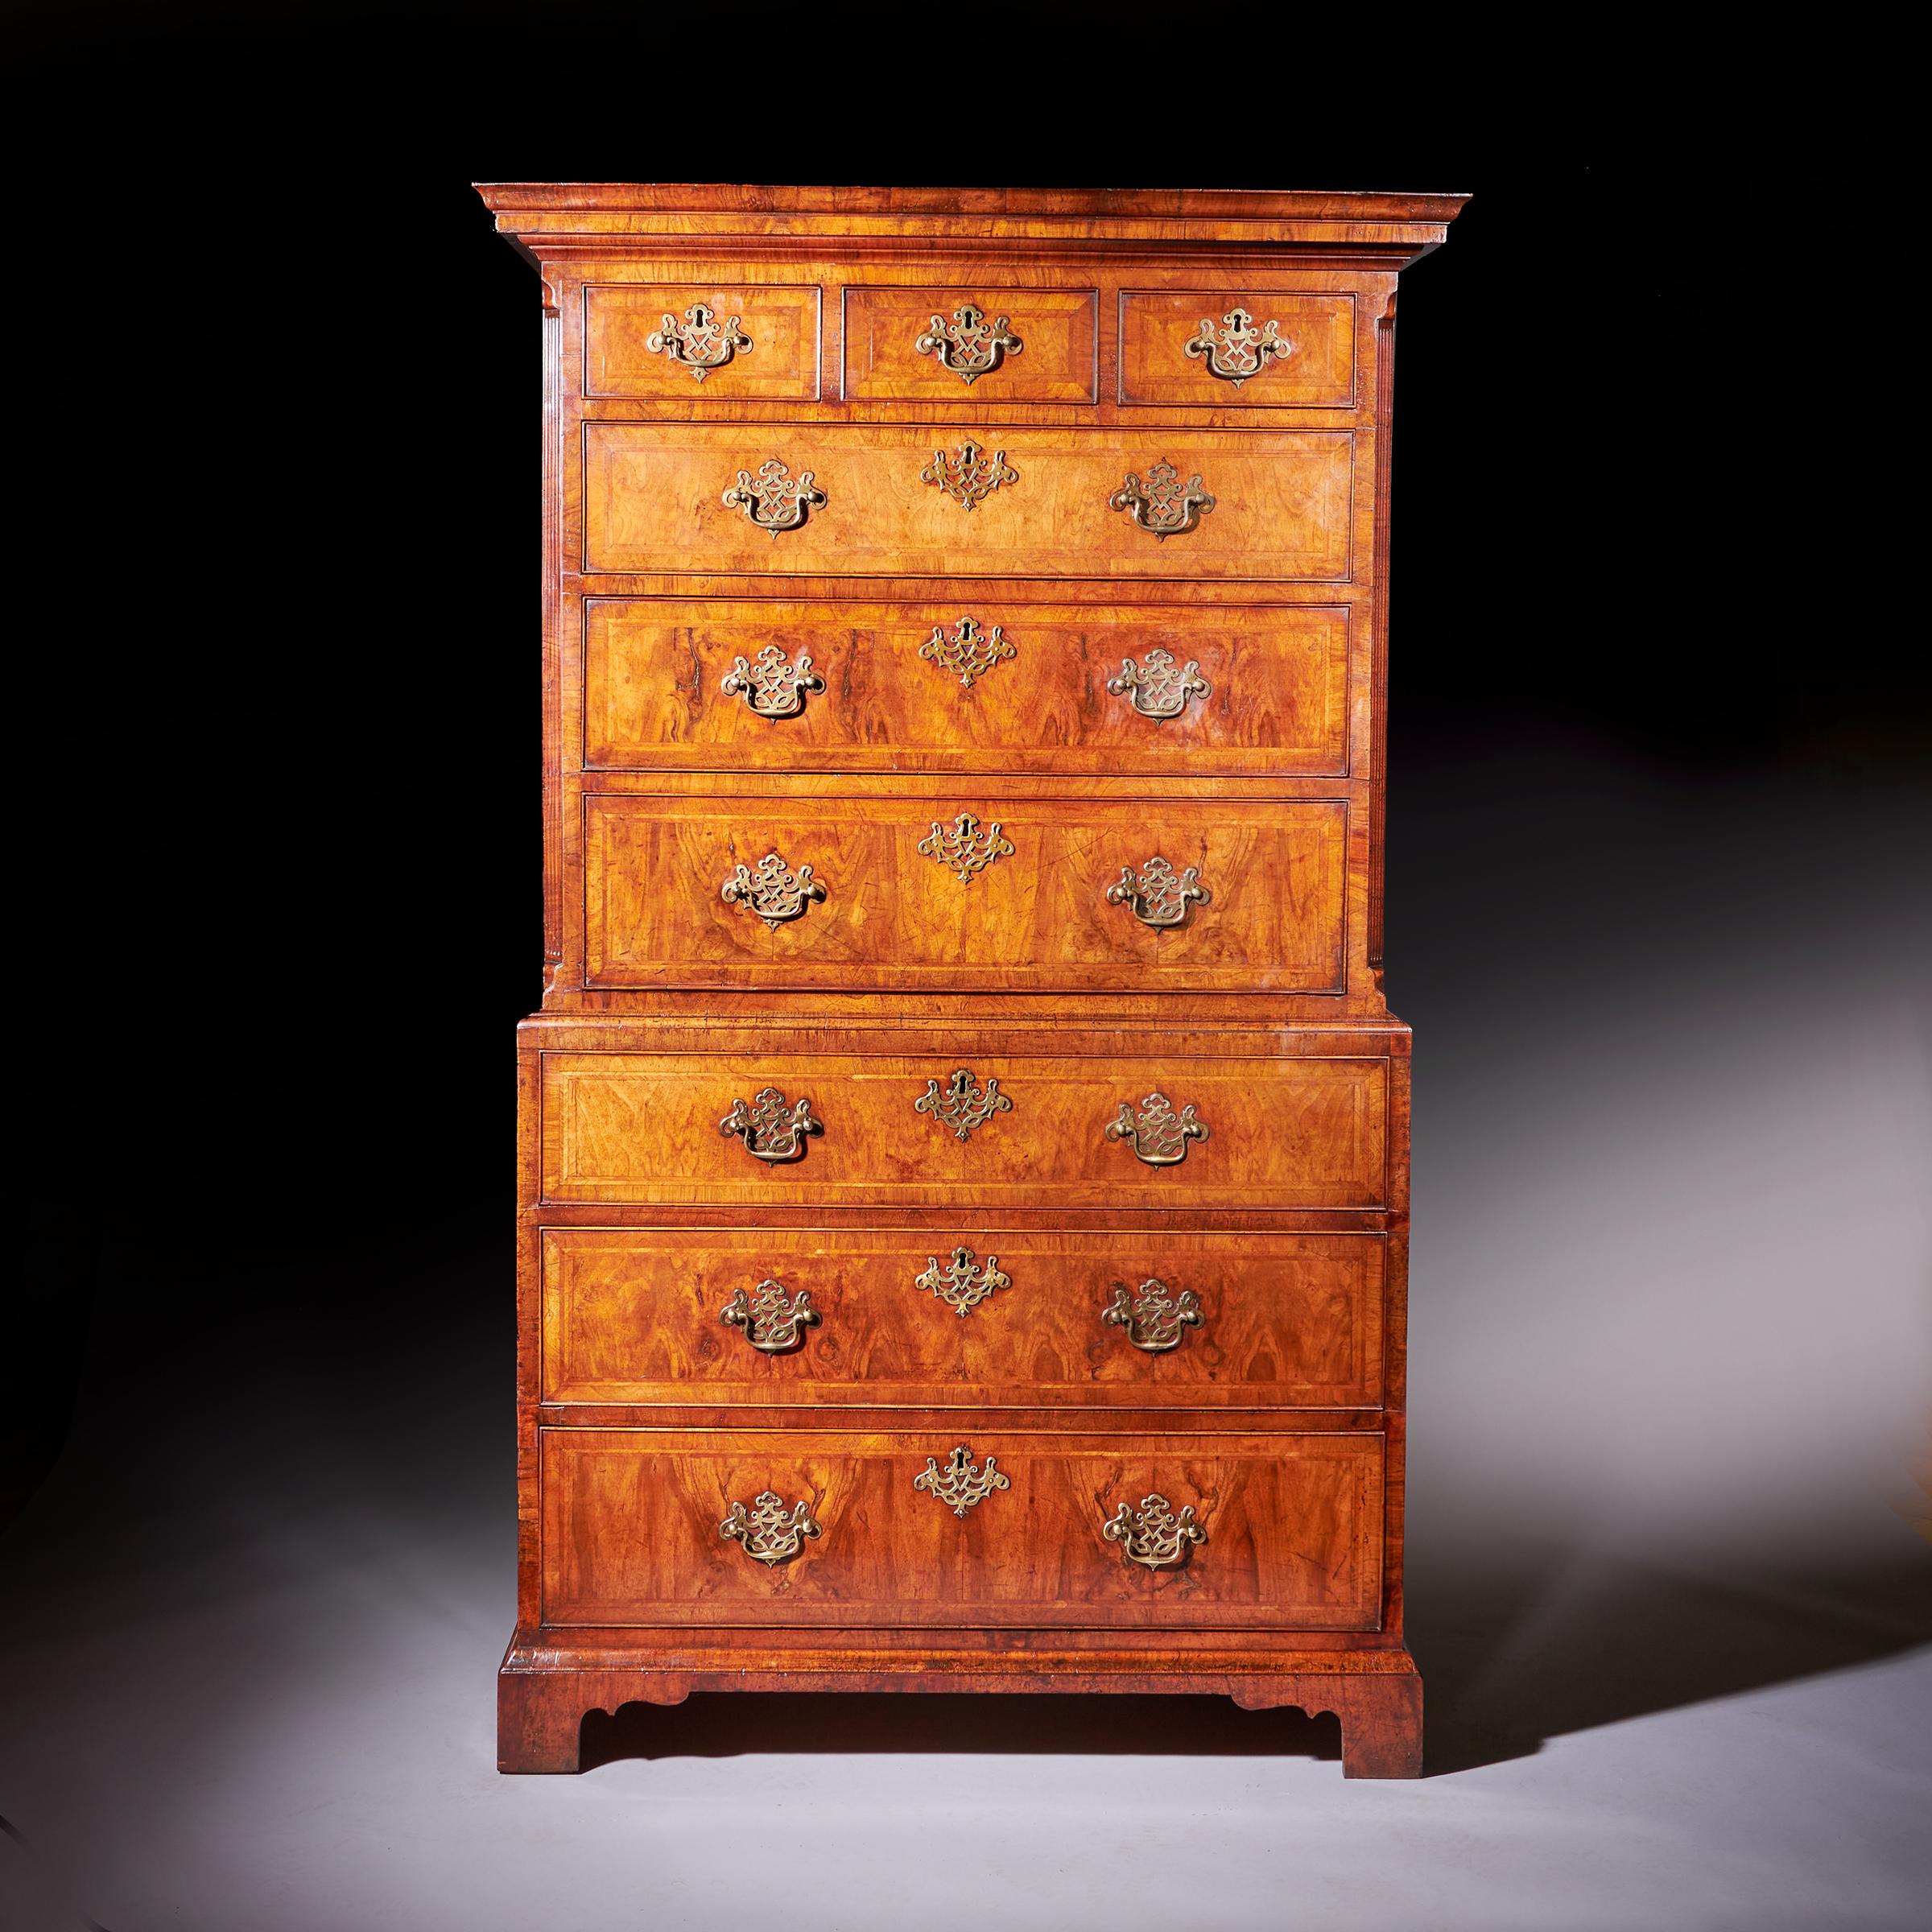 A Fine 18th Century George II Figured Walnut Chest on Chest or Tallboy, Circa 1740. England. 

In two parts divided by a cross grain moulding the reeded upper section consists of a complex cross-grain cornice over three short and three long